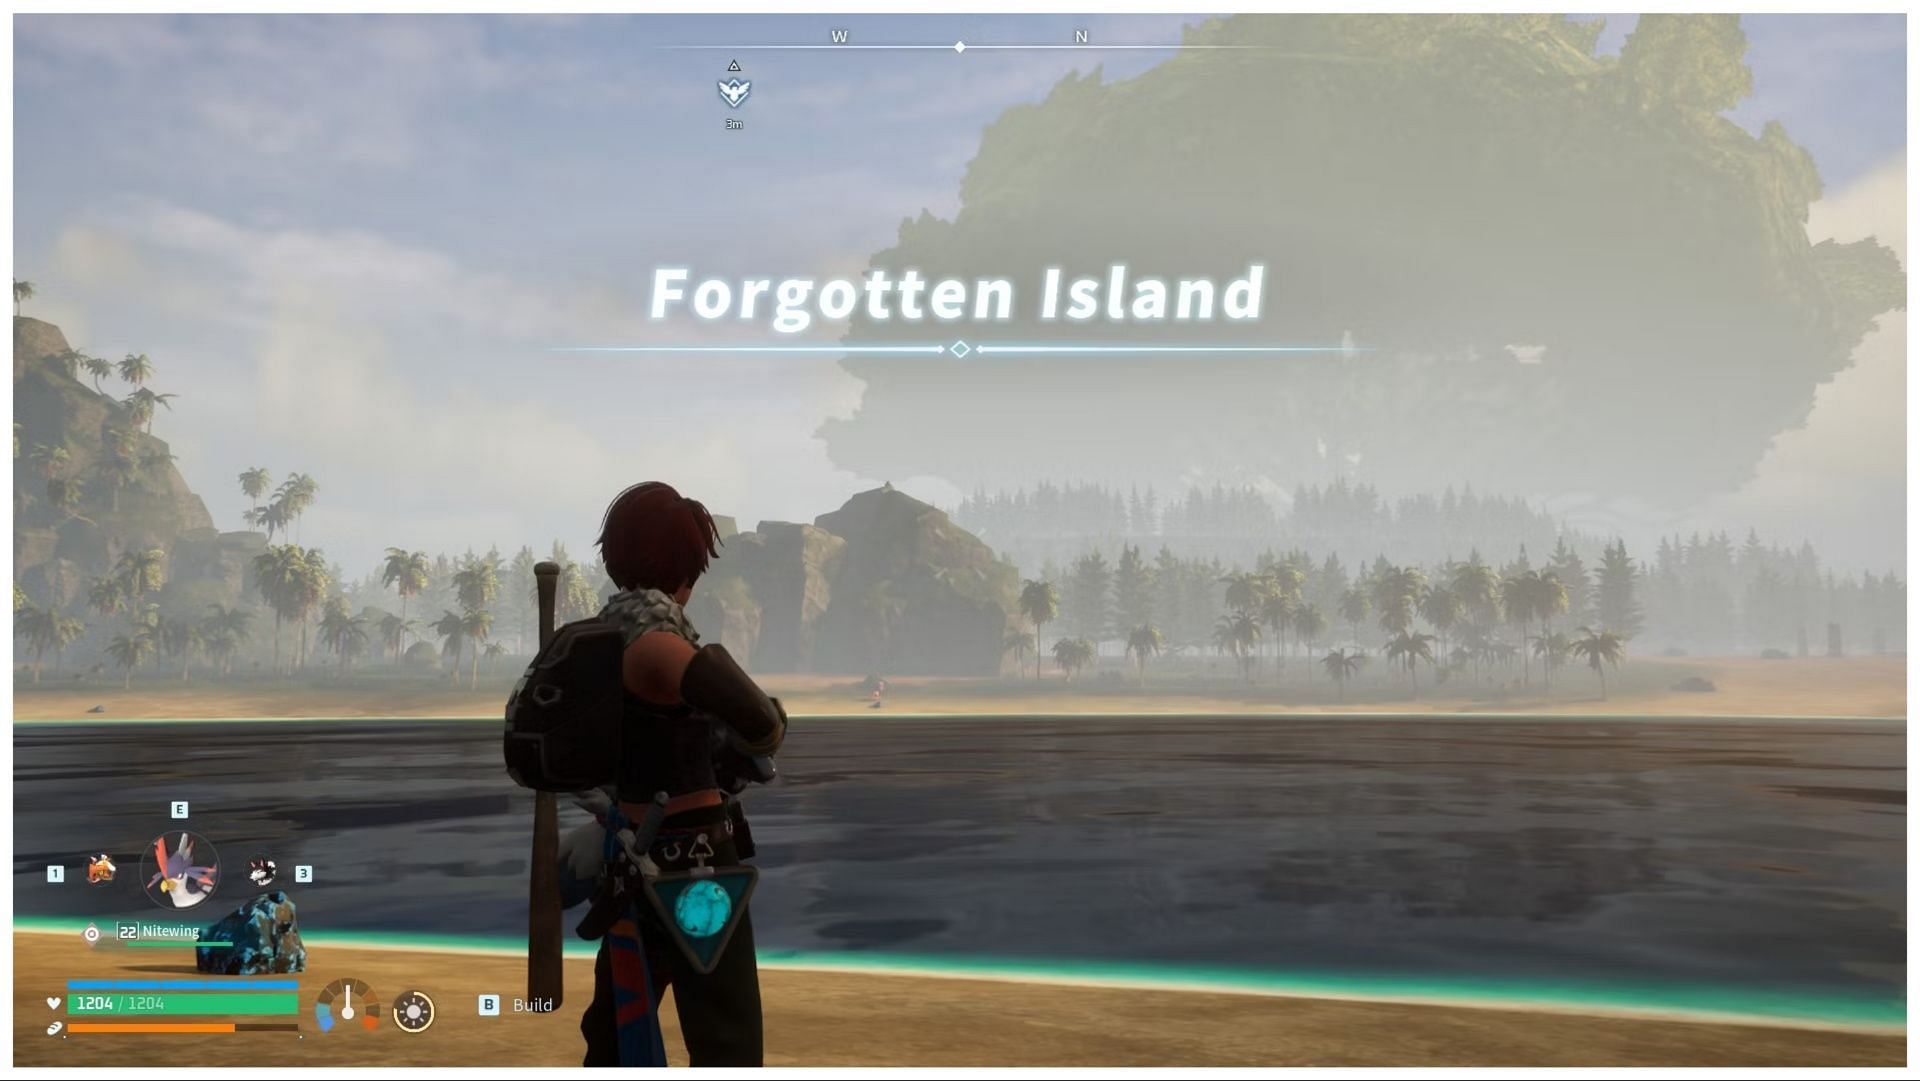 Forgotten Island, as seen in the game. (Image via Pocket Pair, Inc.)